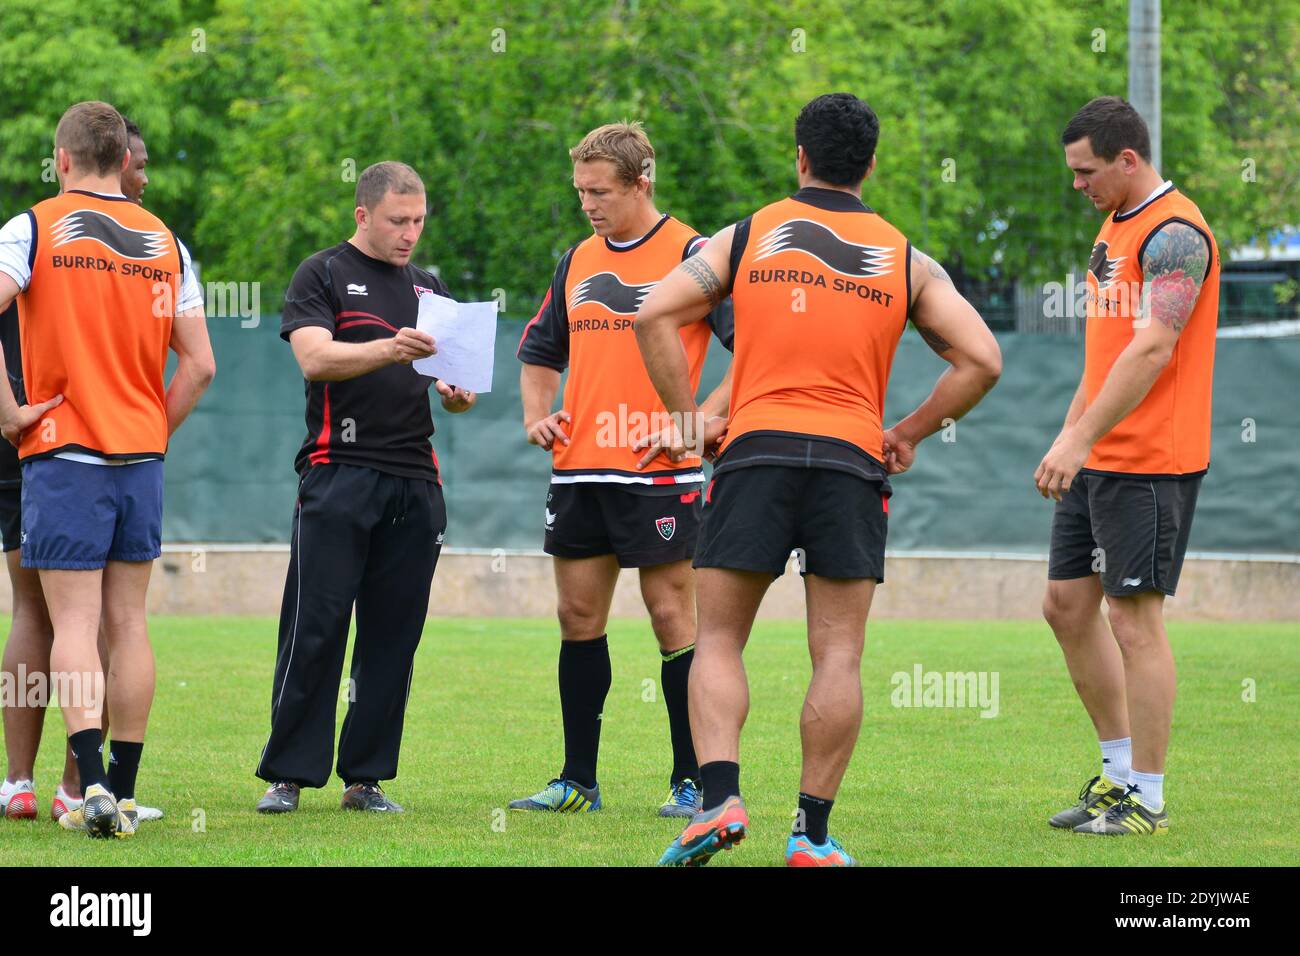 RCT's Pierre Mignoni and Jonny Wilkinson during a rugby training session at Berg Stadium in Toulon, France on May 7, 2013 before the HCup Final against ASM Clermont on May 18 in Dublin. Photo by Felix Golesi/ABACAPRESS.COM Stock Photo